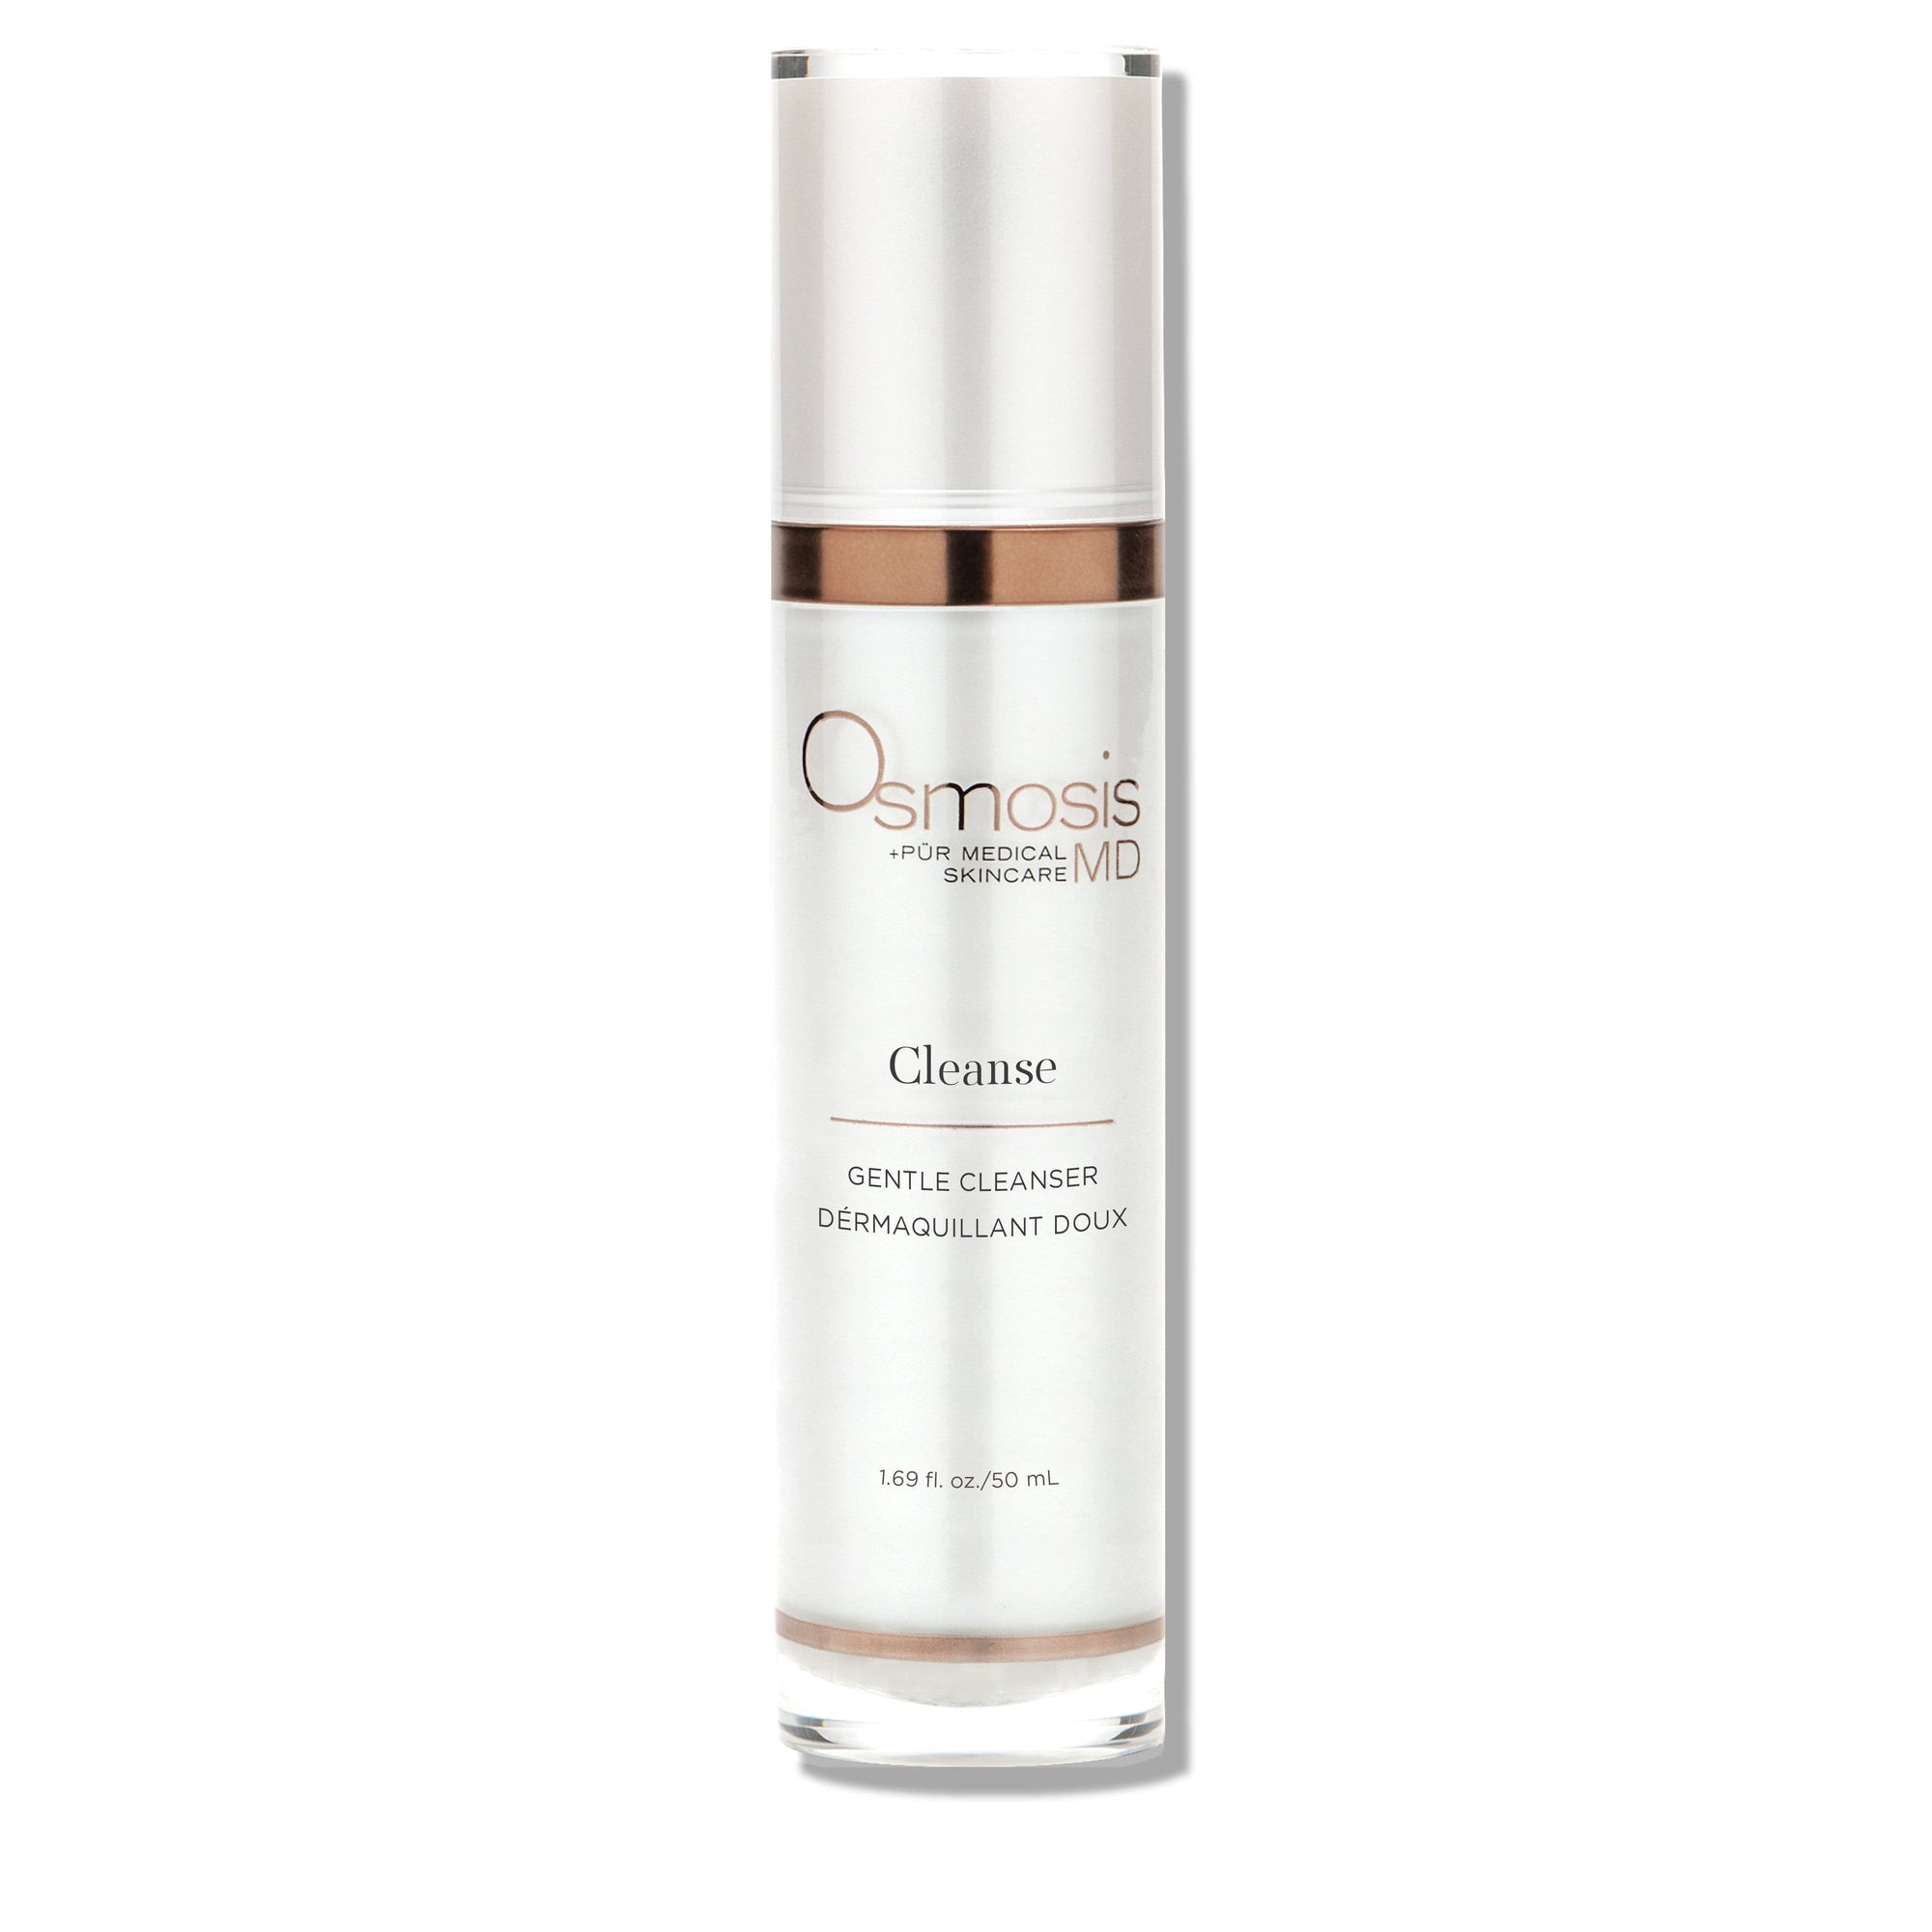 Osmosis MD Cleanse Gentle Cleanser 1.69 fl oz